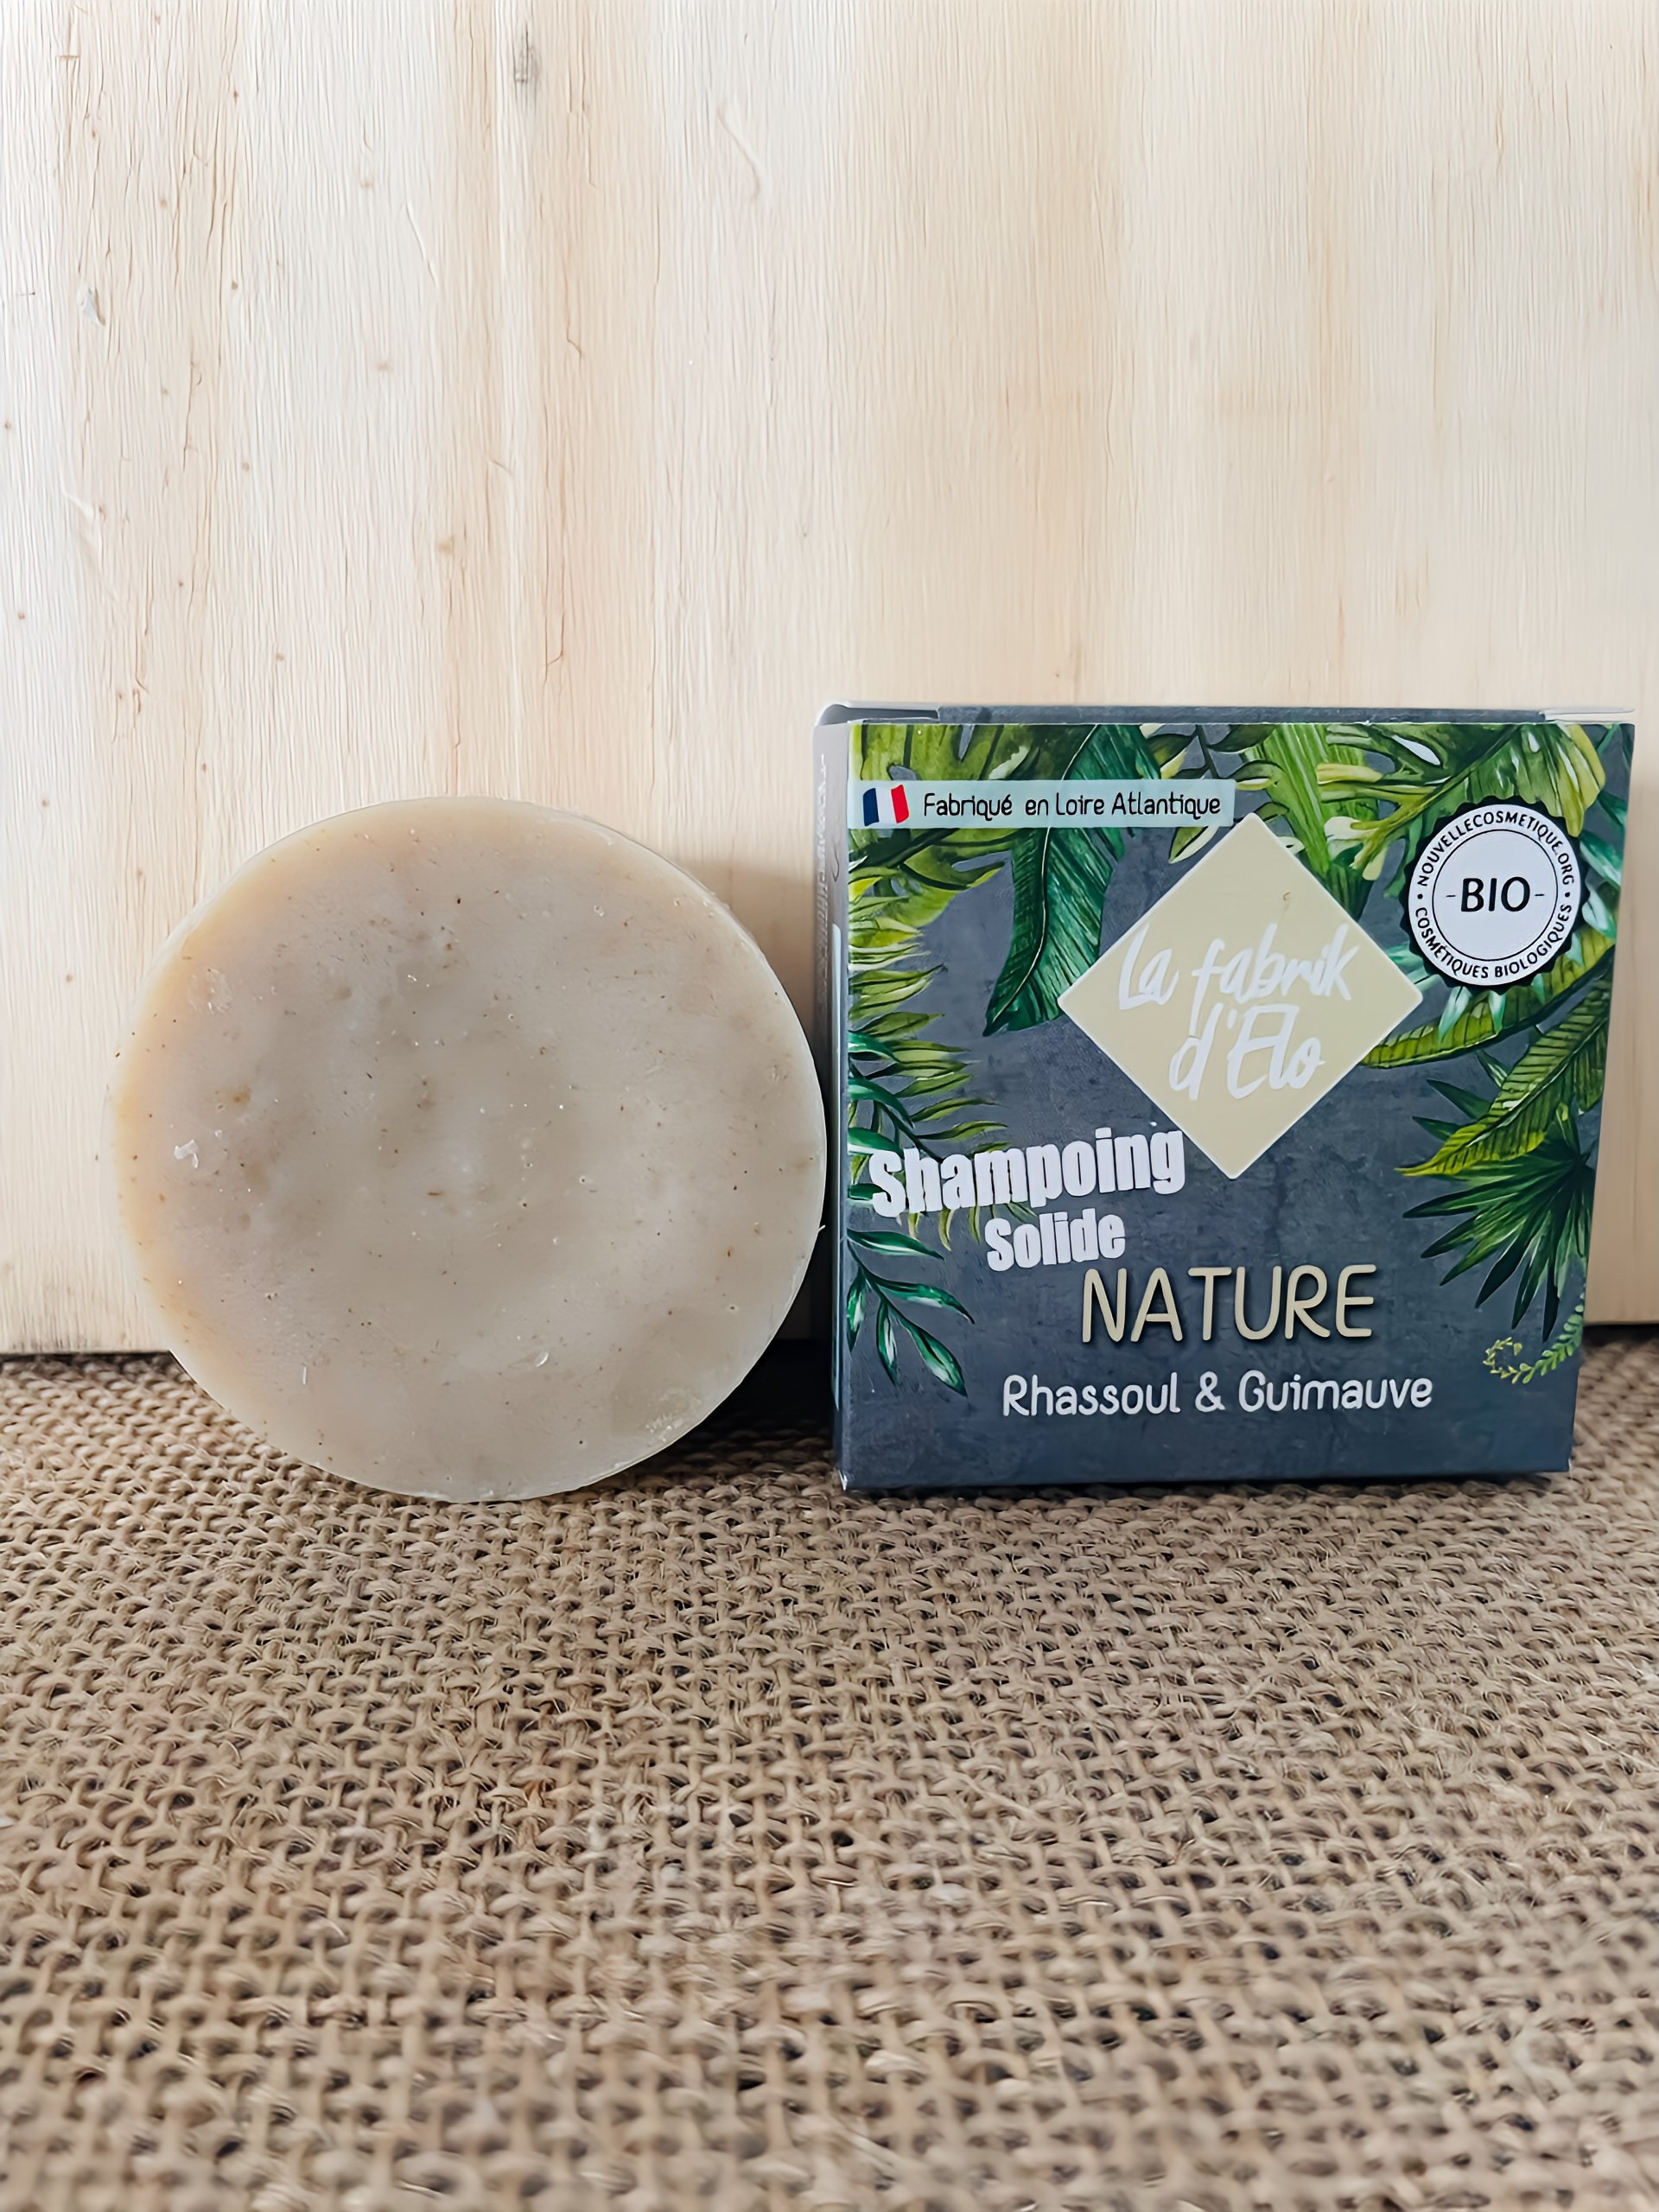 Shampoing Solide Nature - Avec emballage